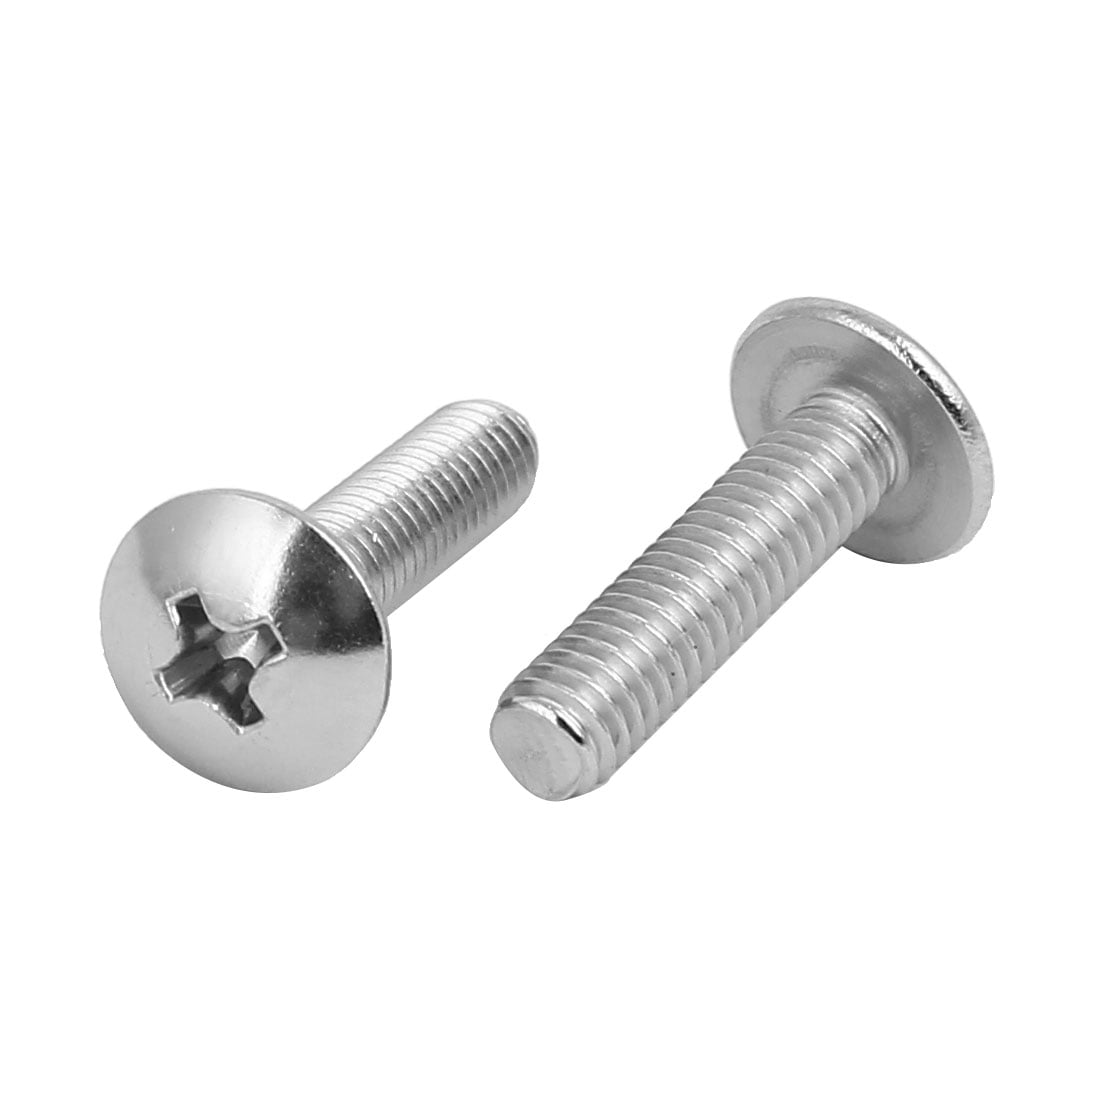 M4x16mm Thread 316 Stainless Steel Truss Phillips Head Self Tapping Screw 15pcs